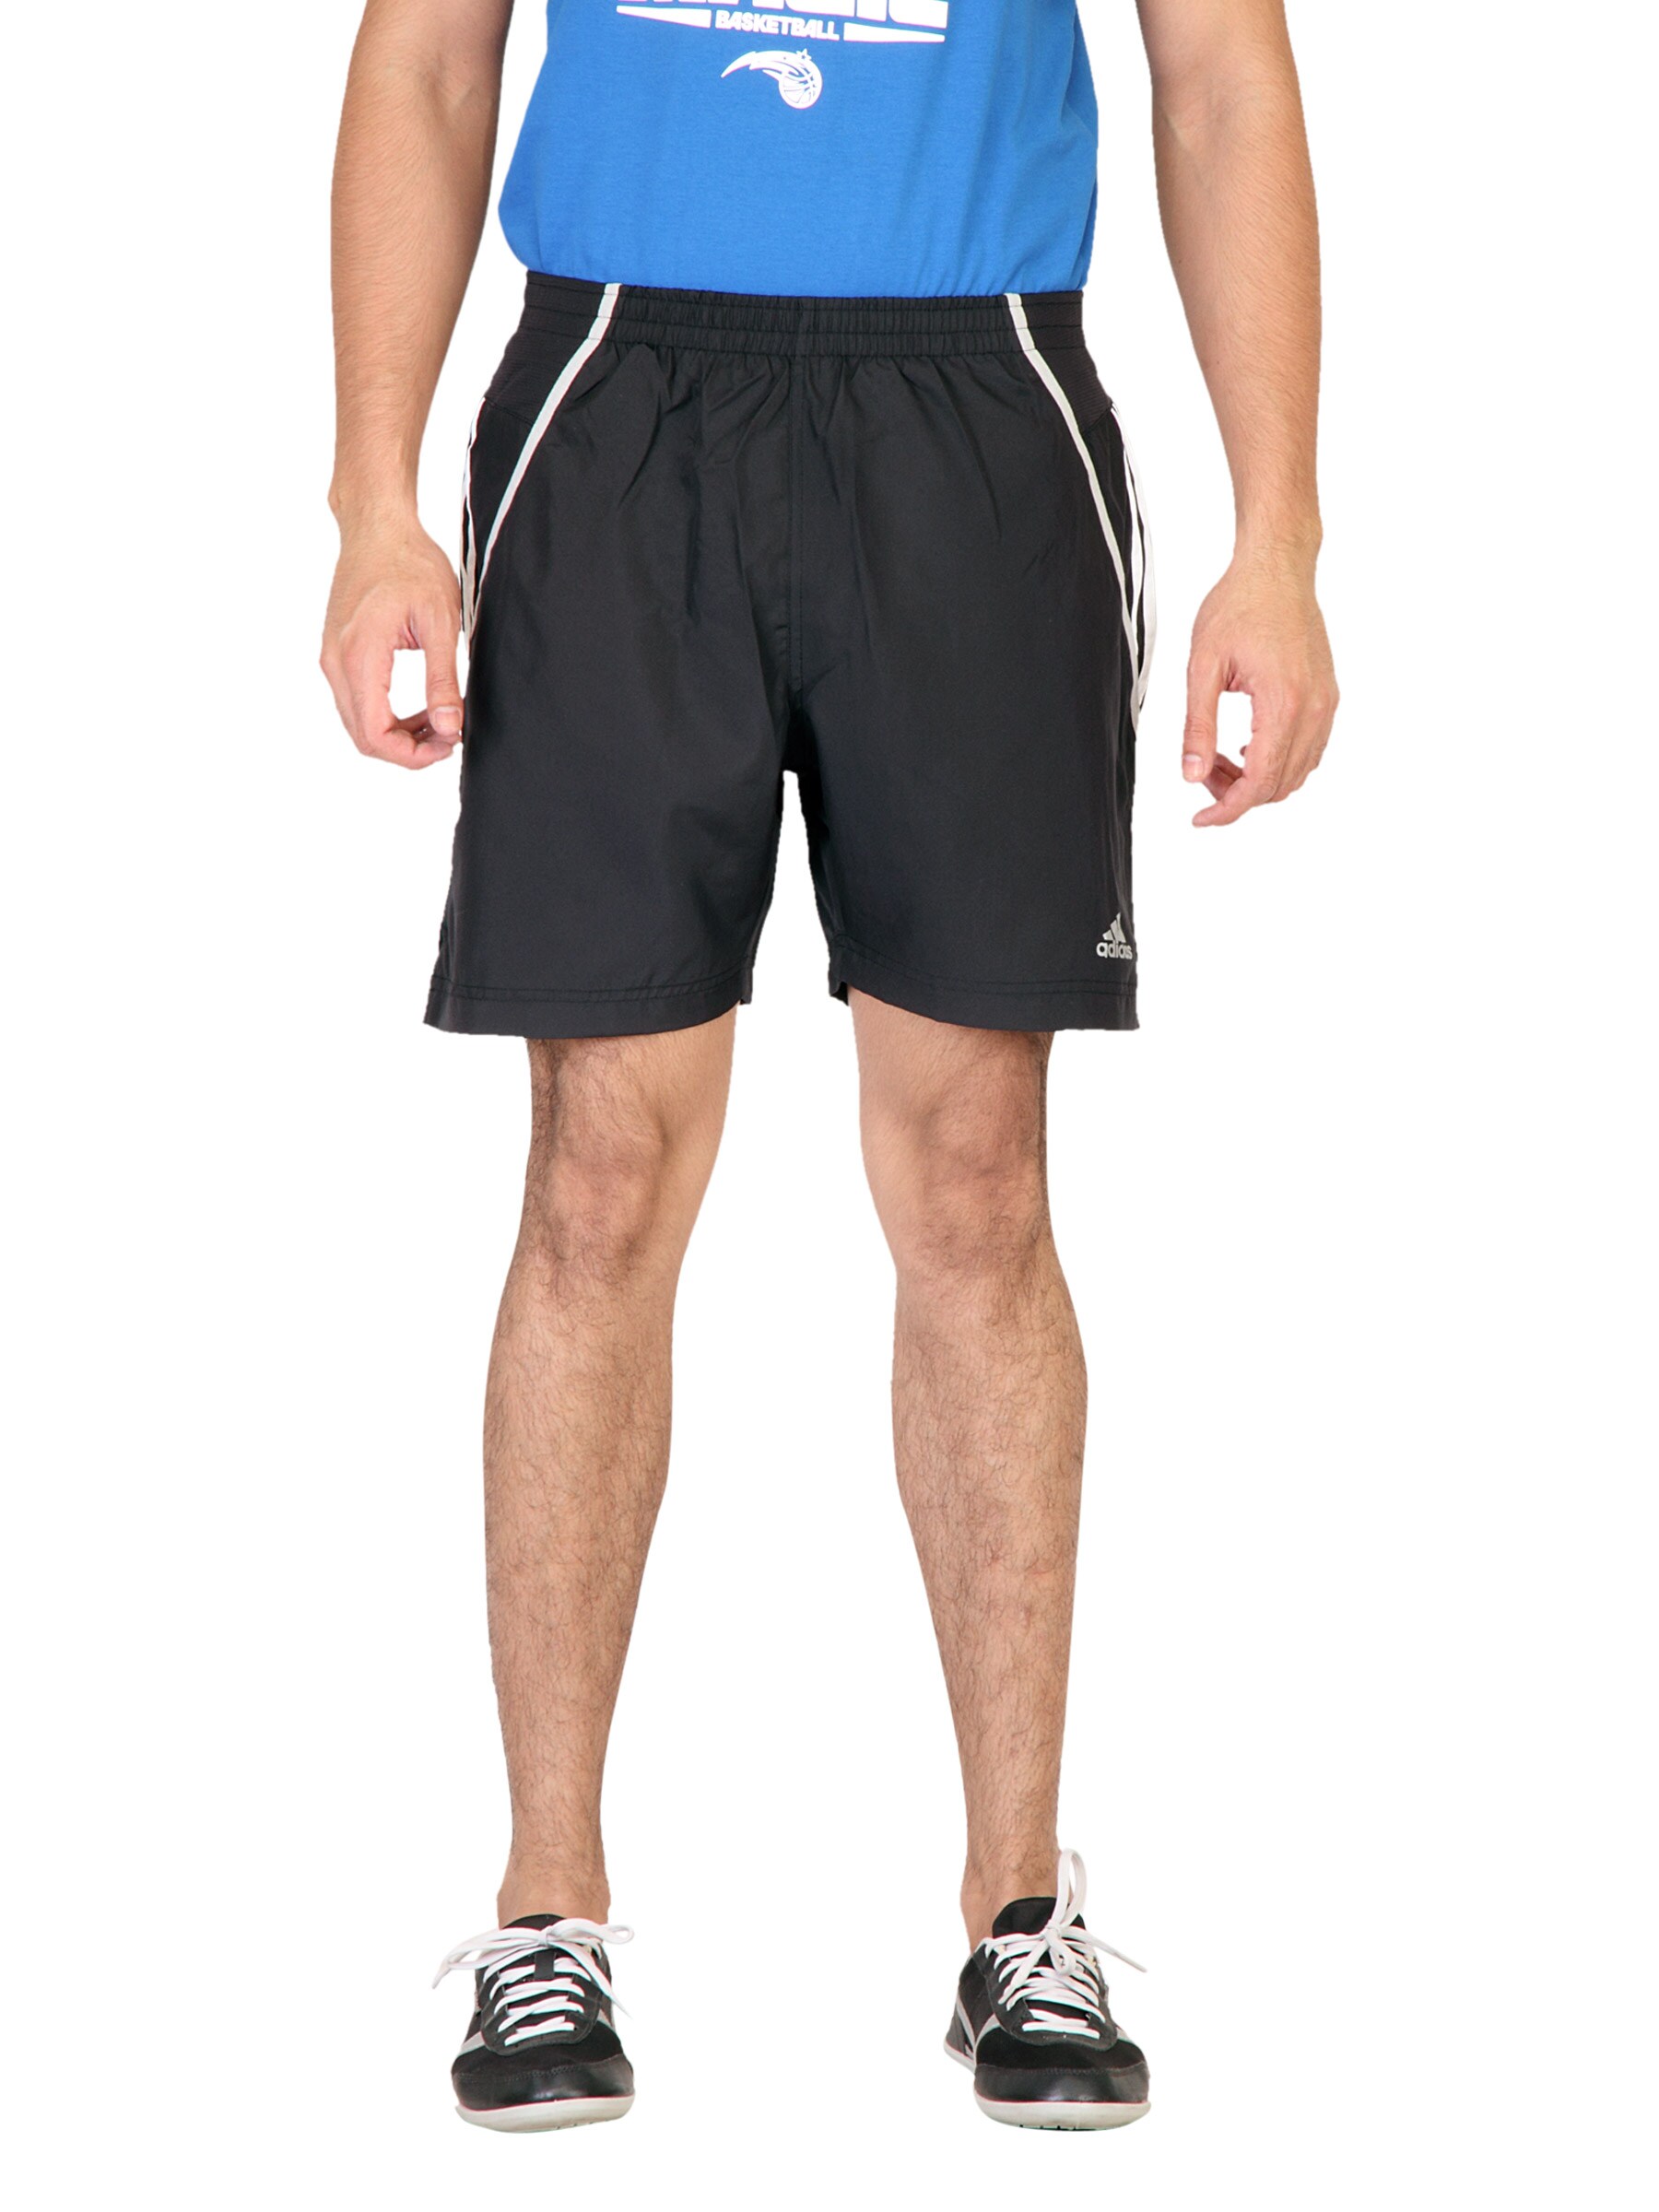 ADIDAS Men Rsp Ds 7in Black Shorts